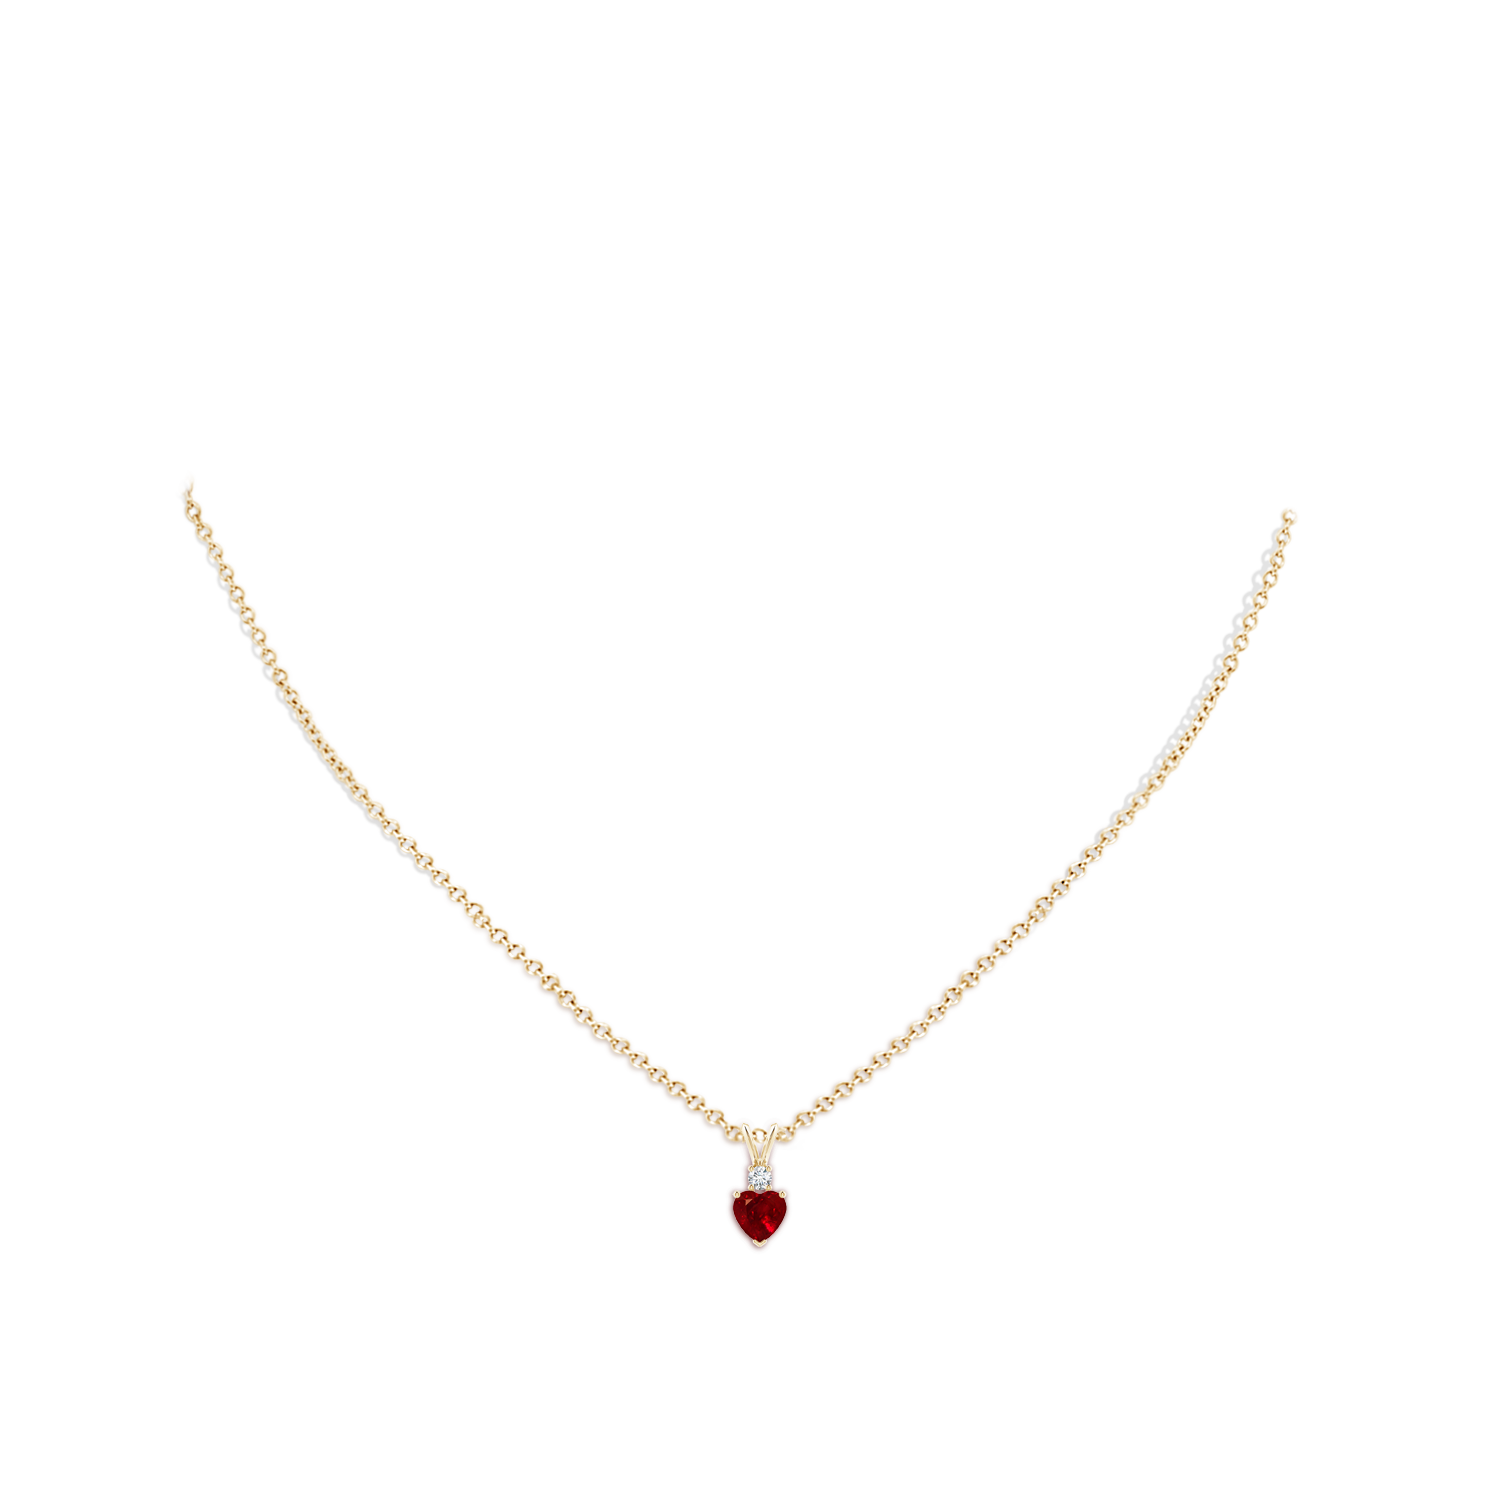 AAAA - Ruby / 0.59 CT / 14 KT Yellow Gold